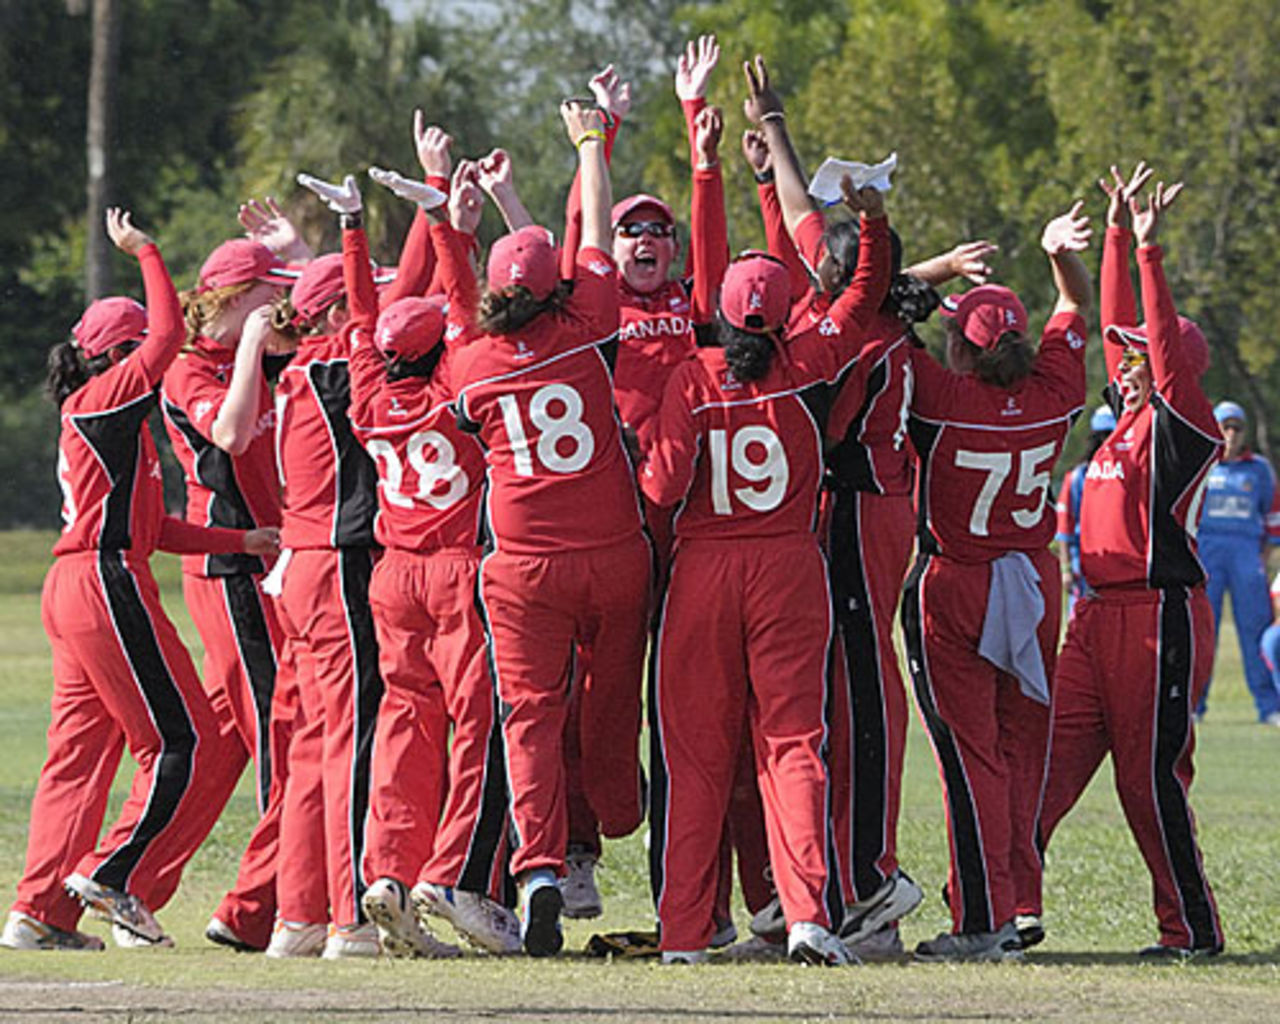 Canada celebrate their win over USA, ICC Americas women's championship, Florida, May 20, 2009